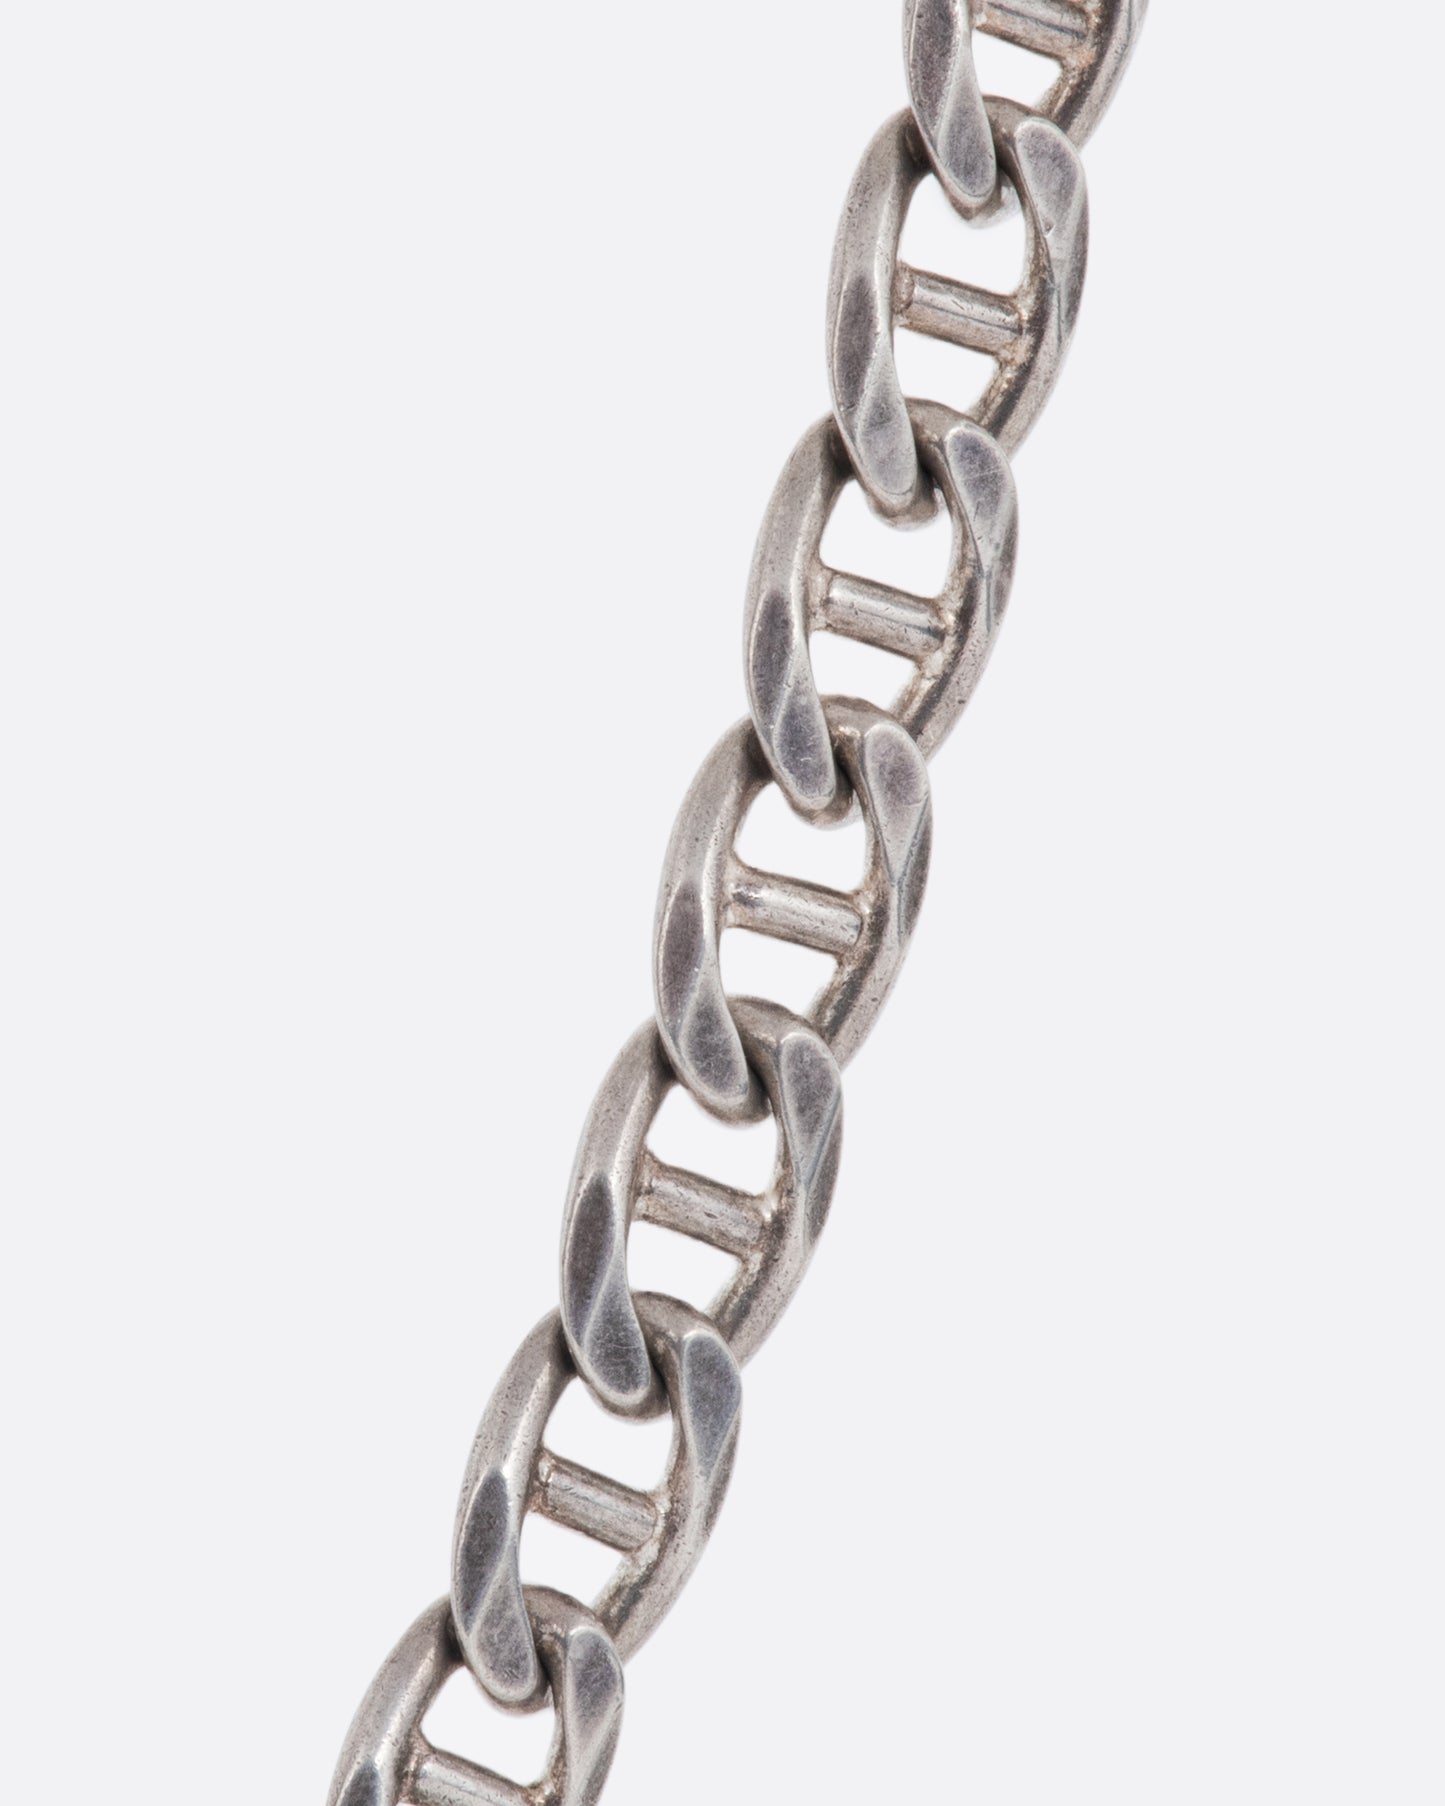 A vintage sterling silver flat mariner chain necklace - shown close up.